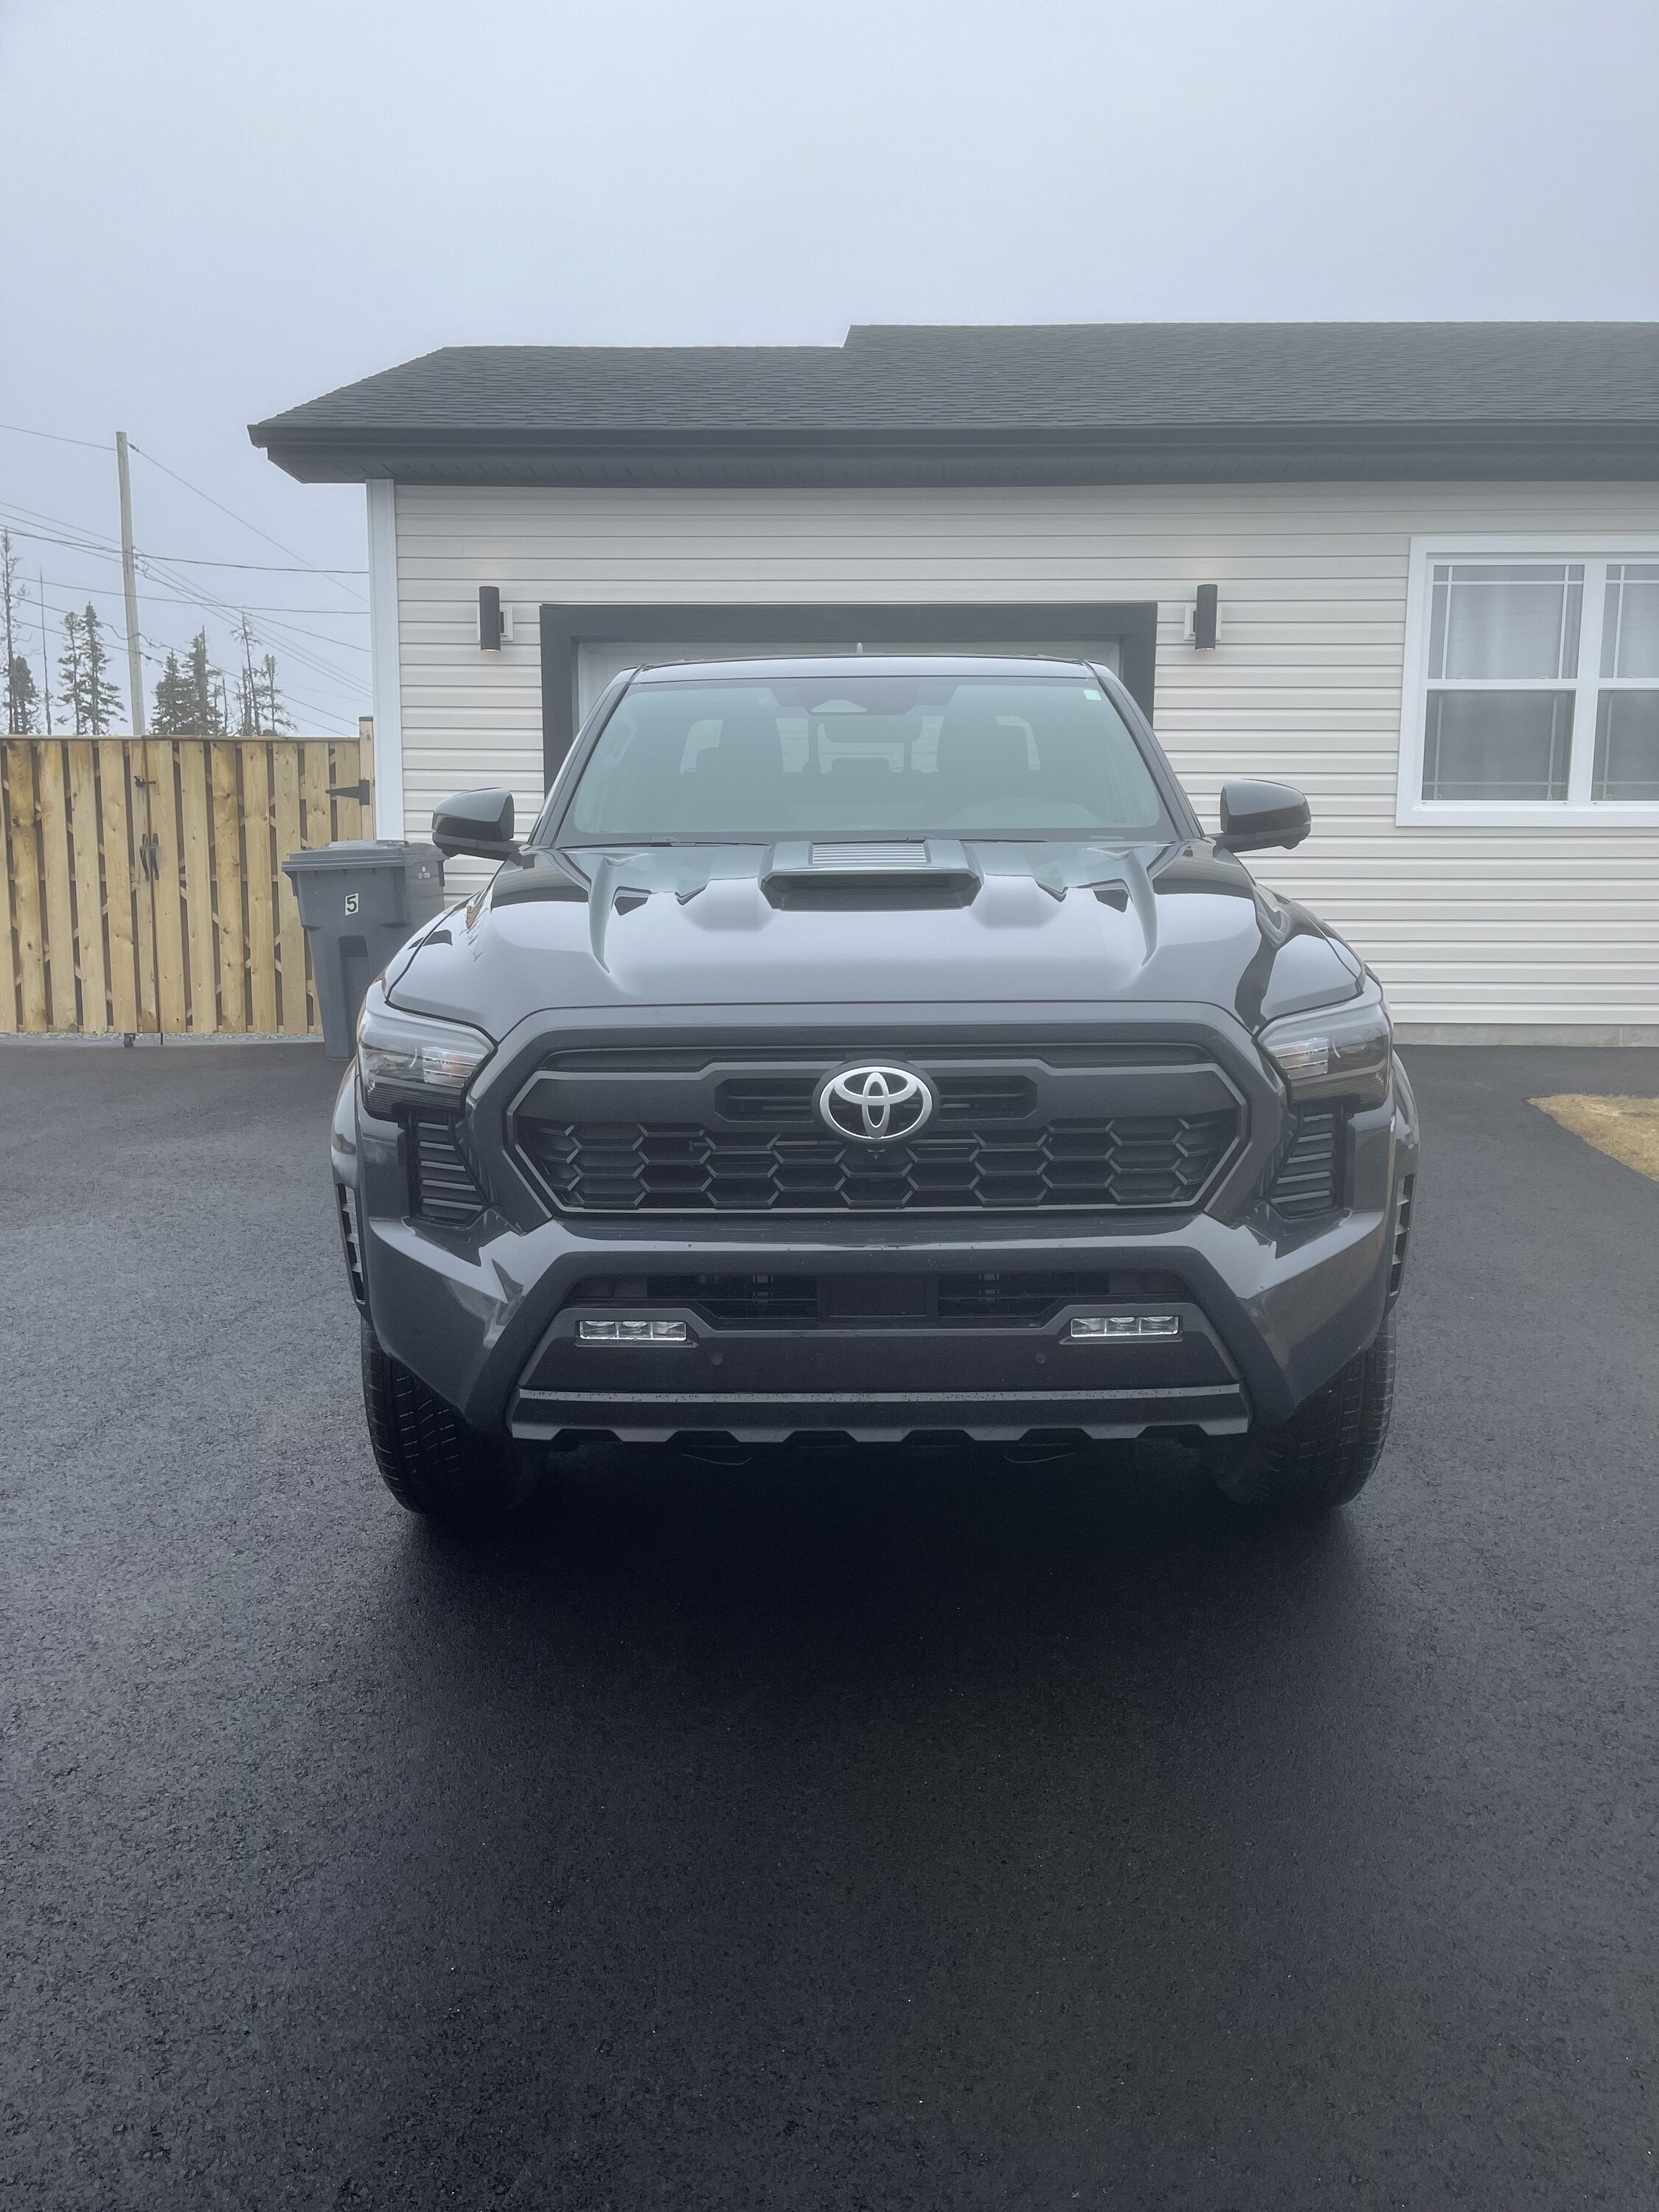 2024 Tacoma Anyone in Canada getting any dealer updates? IMG_9479